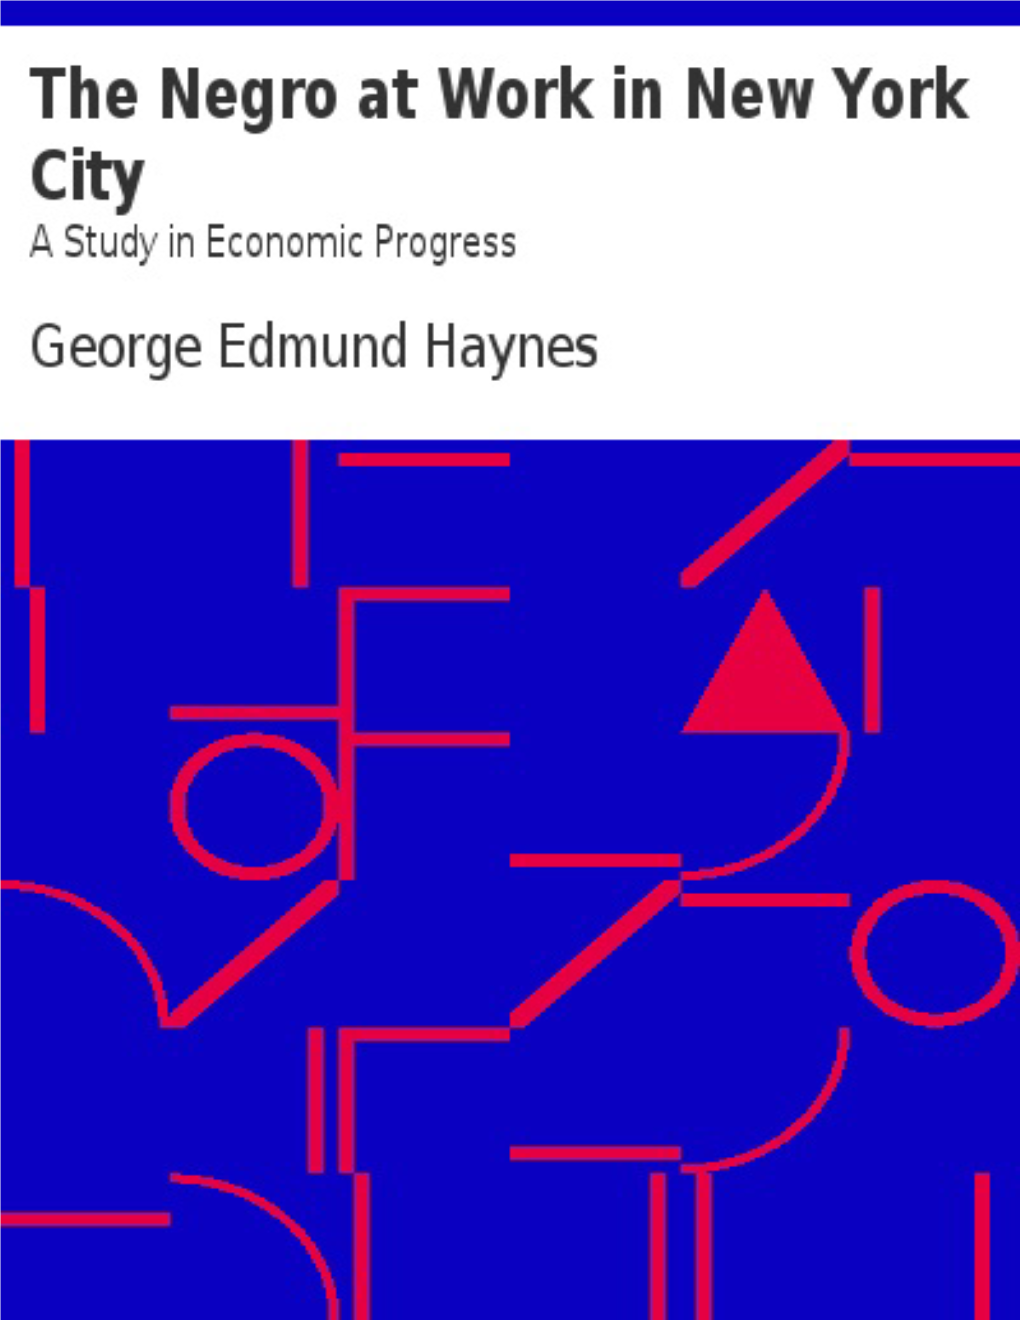 The Negro at Work in New York City, by George Edmund Haynes This Ebook Is for the Use of Anyone Anywhere at No Cost and with Almost No Restrictions Whatsoever